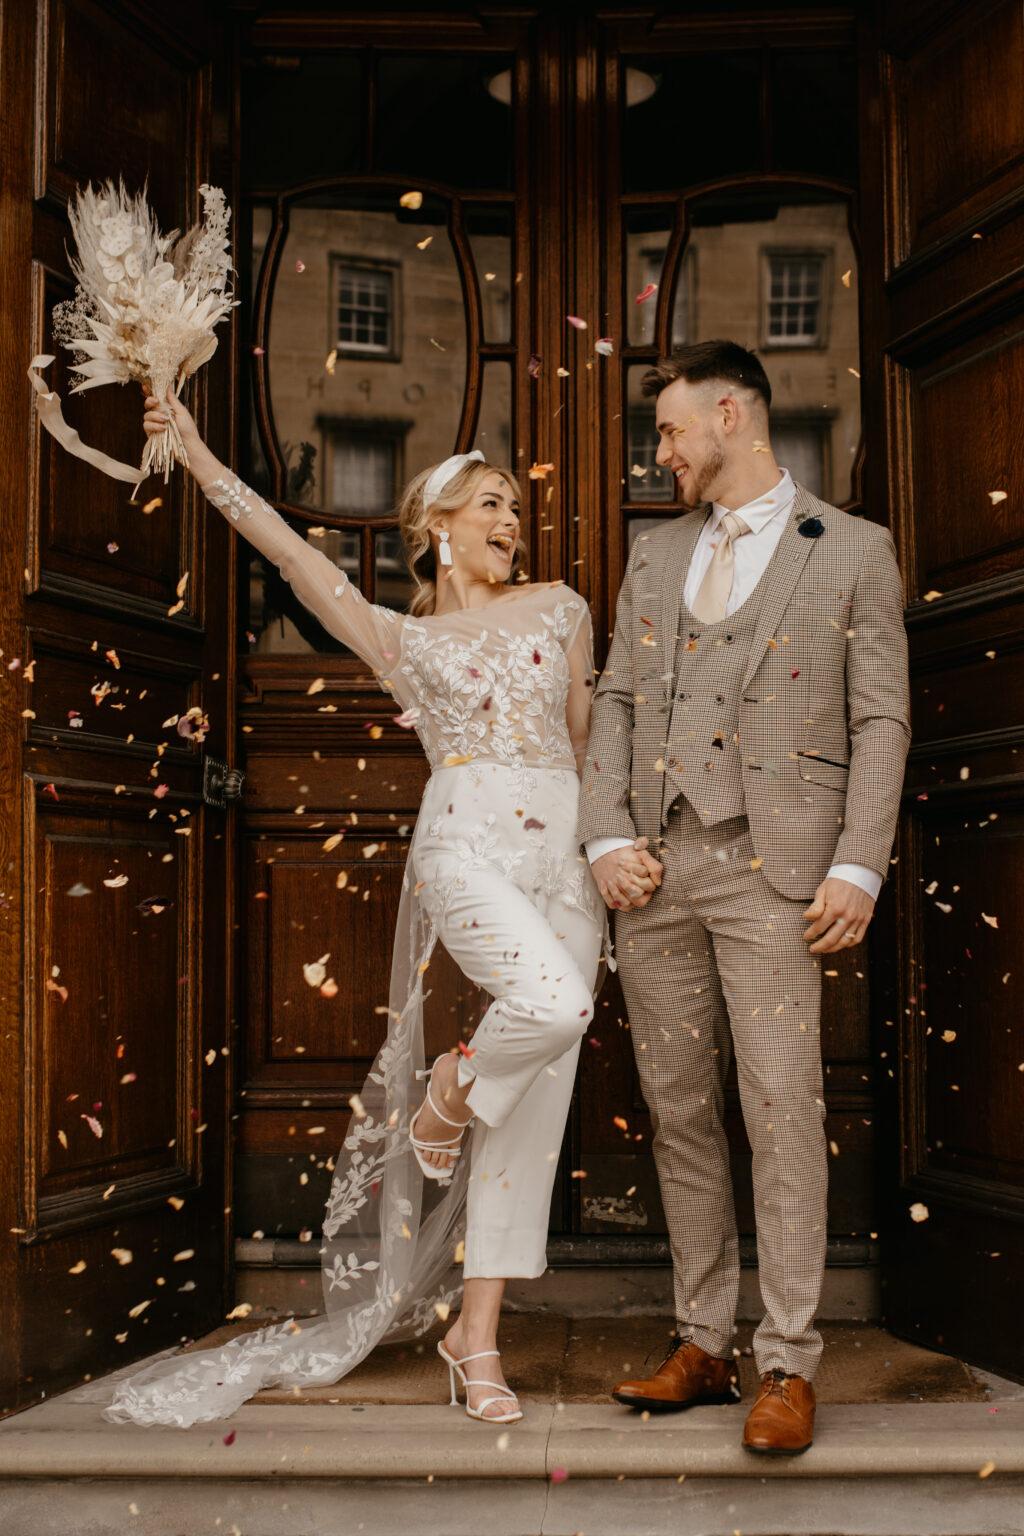 City Elopement With Bridal Jumpsuit and Vintage Wedding Car In Guildhall, Bath